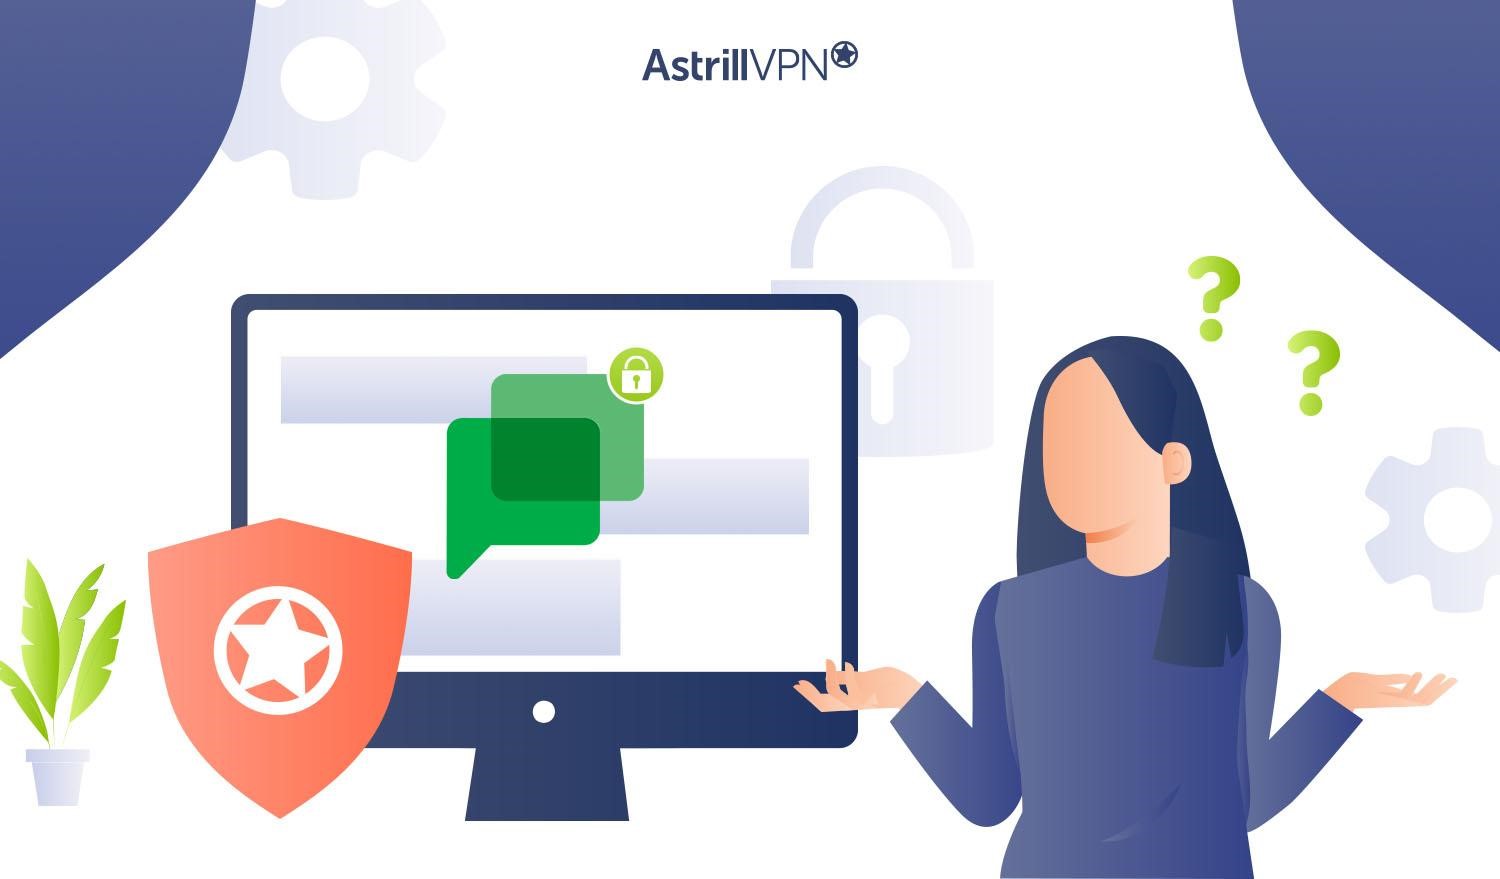 How AstrillVPN can help to use Google Chat safely